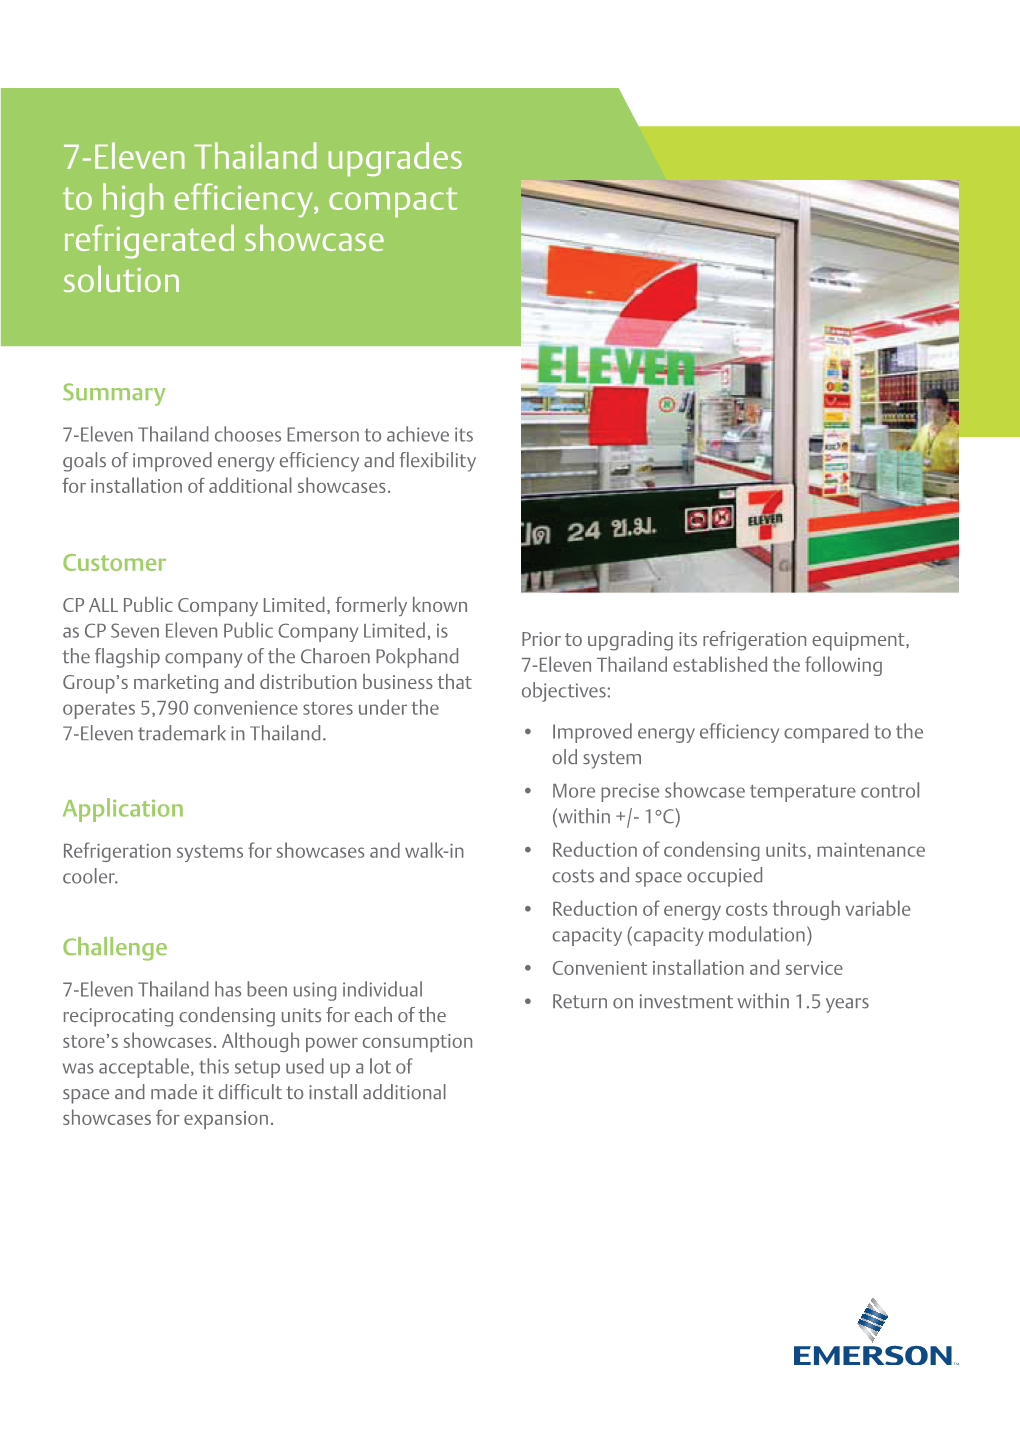 7-Eleven Thailand Upgrades to High Efficiency, Compact Refrigerated Showcase Solution